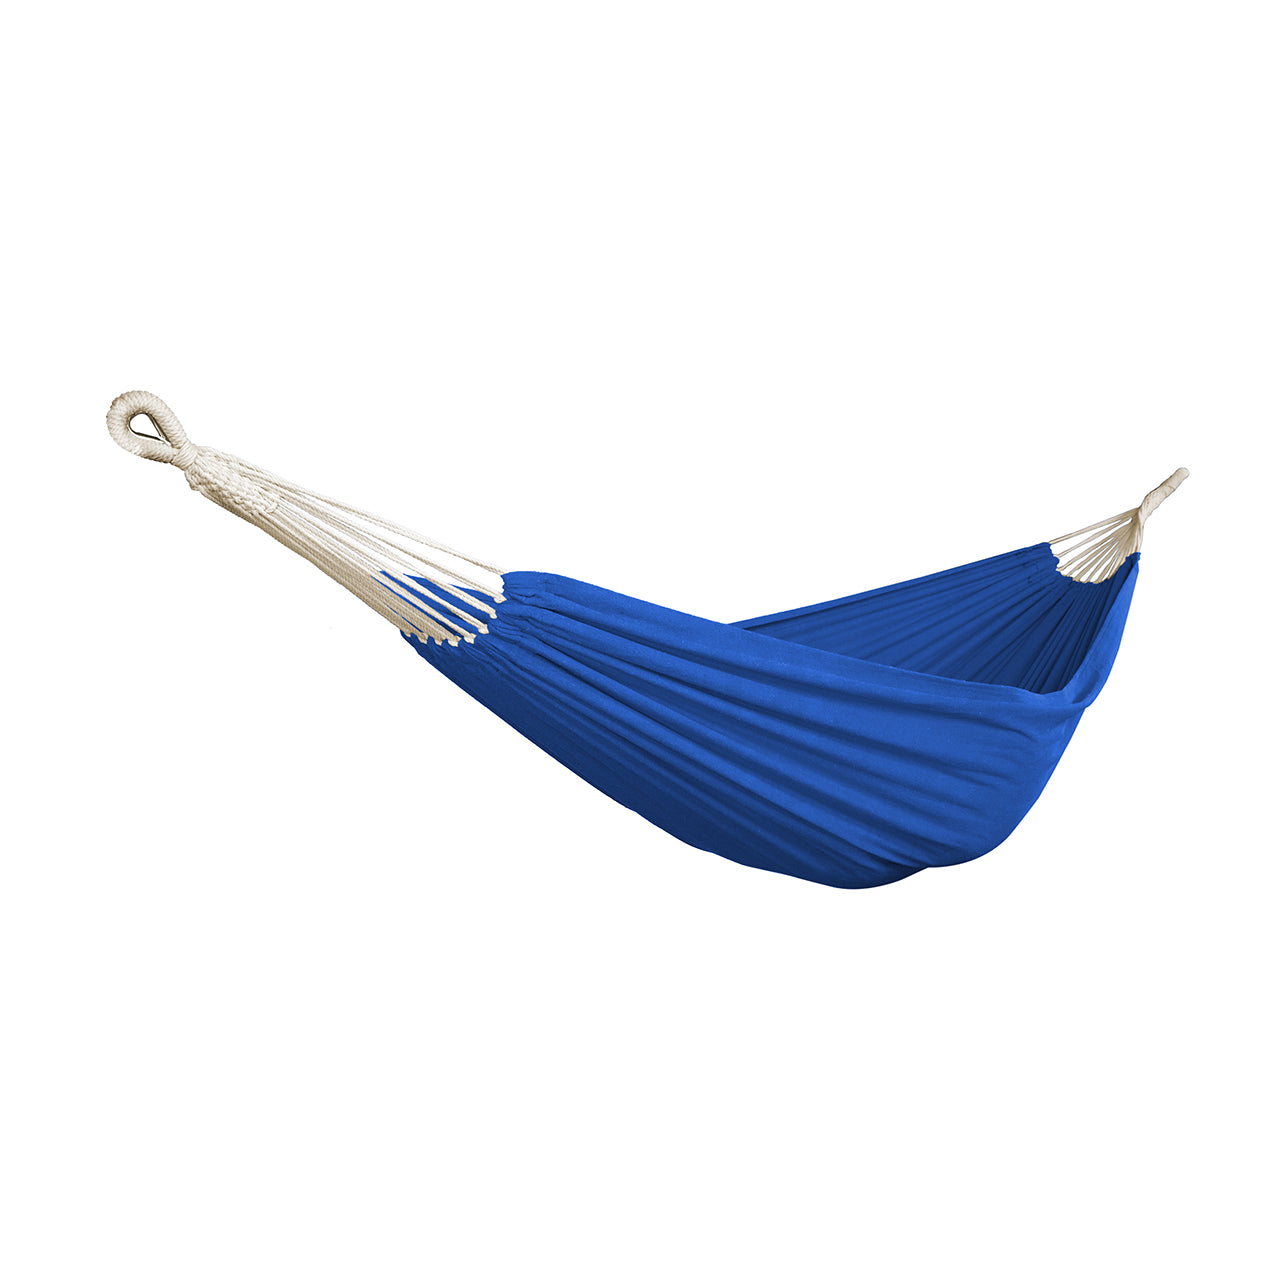 Bliss Hammocks 60-inch Wide Double Hammock in a Bag with Hand-woven Rope loops in the Dark Blue variation.